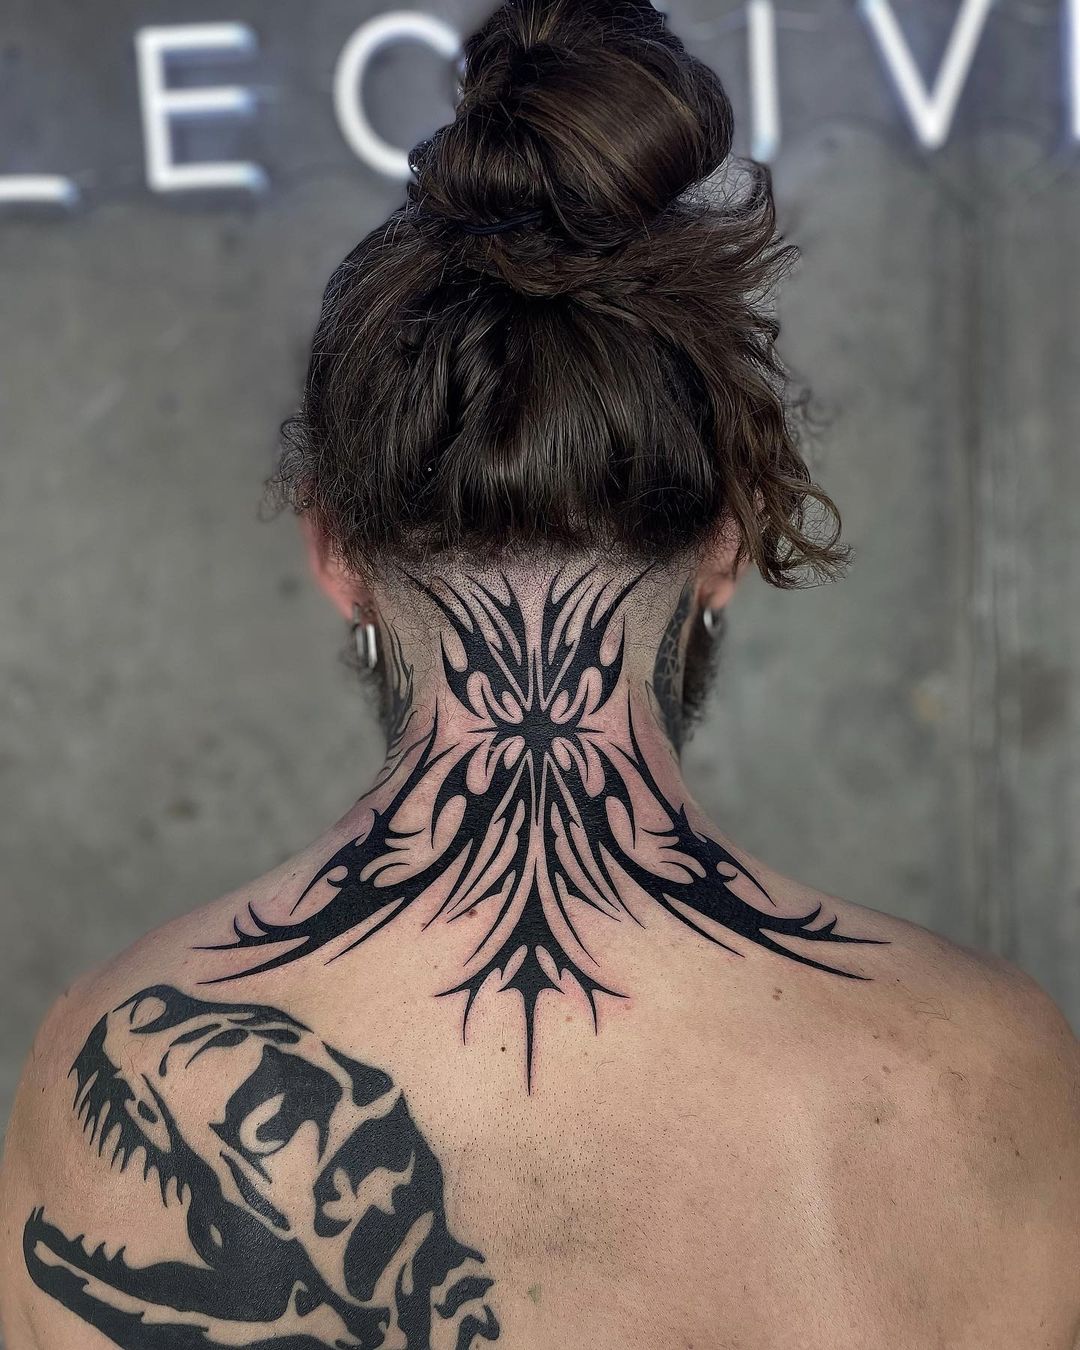 Does it hurt to get a tattoo on your neck? - Quora